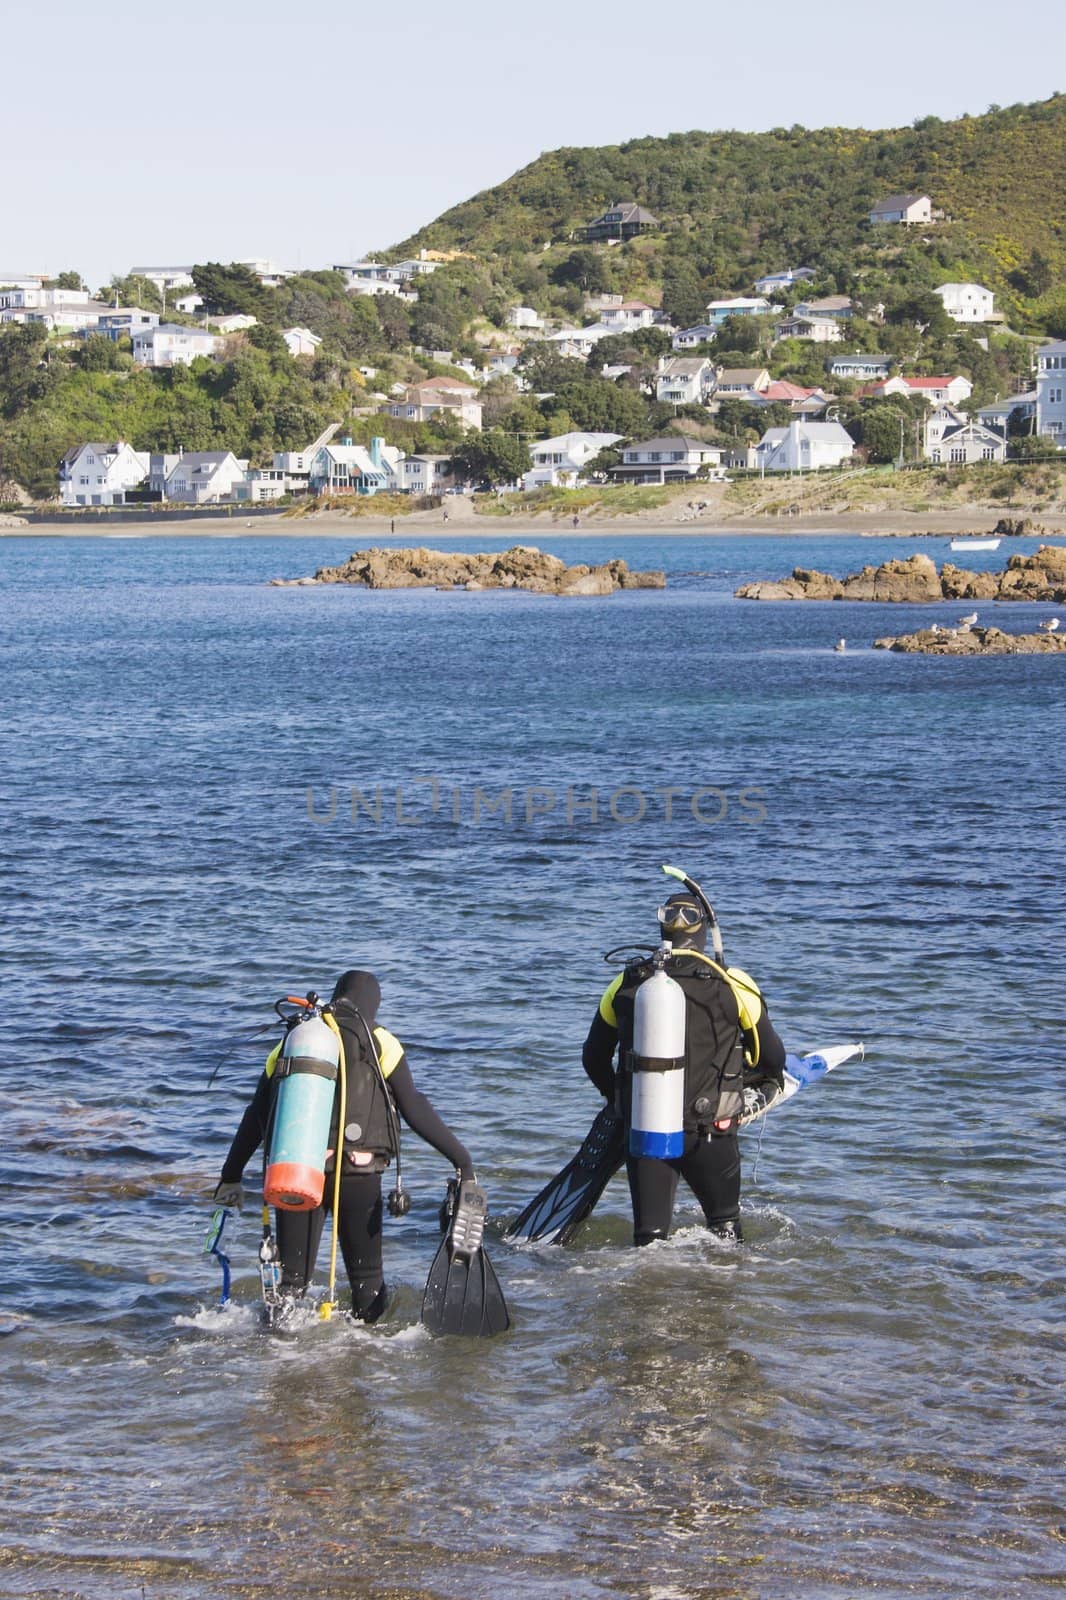 Entering the water at Island Bay, Wellington, New Zealand